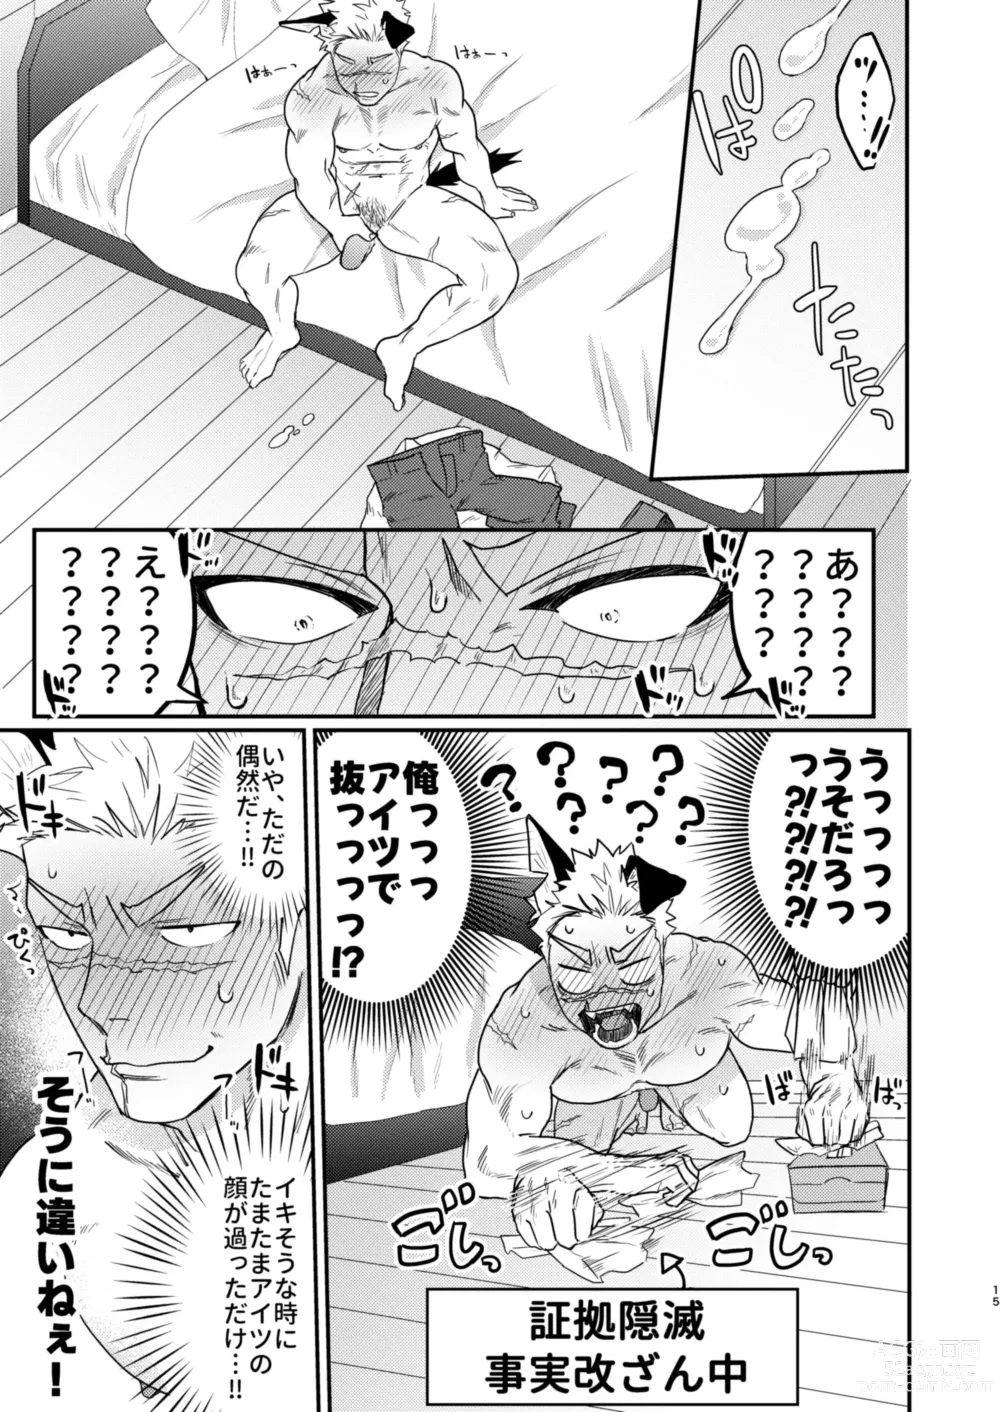 Page 12 of doujinshi It Looks like My Dog is in Heat